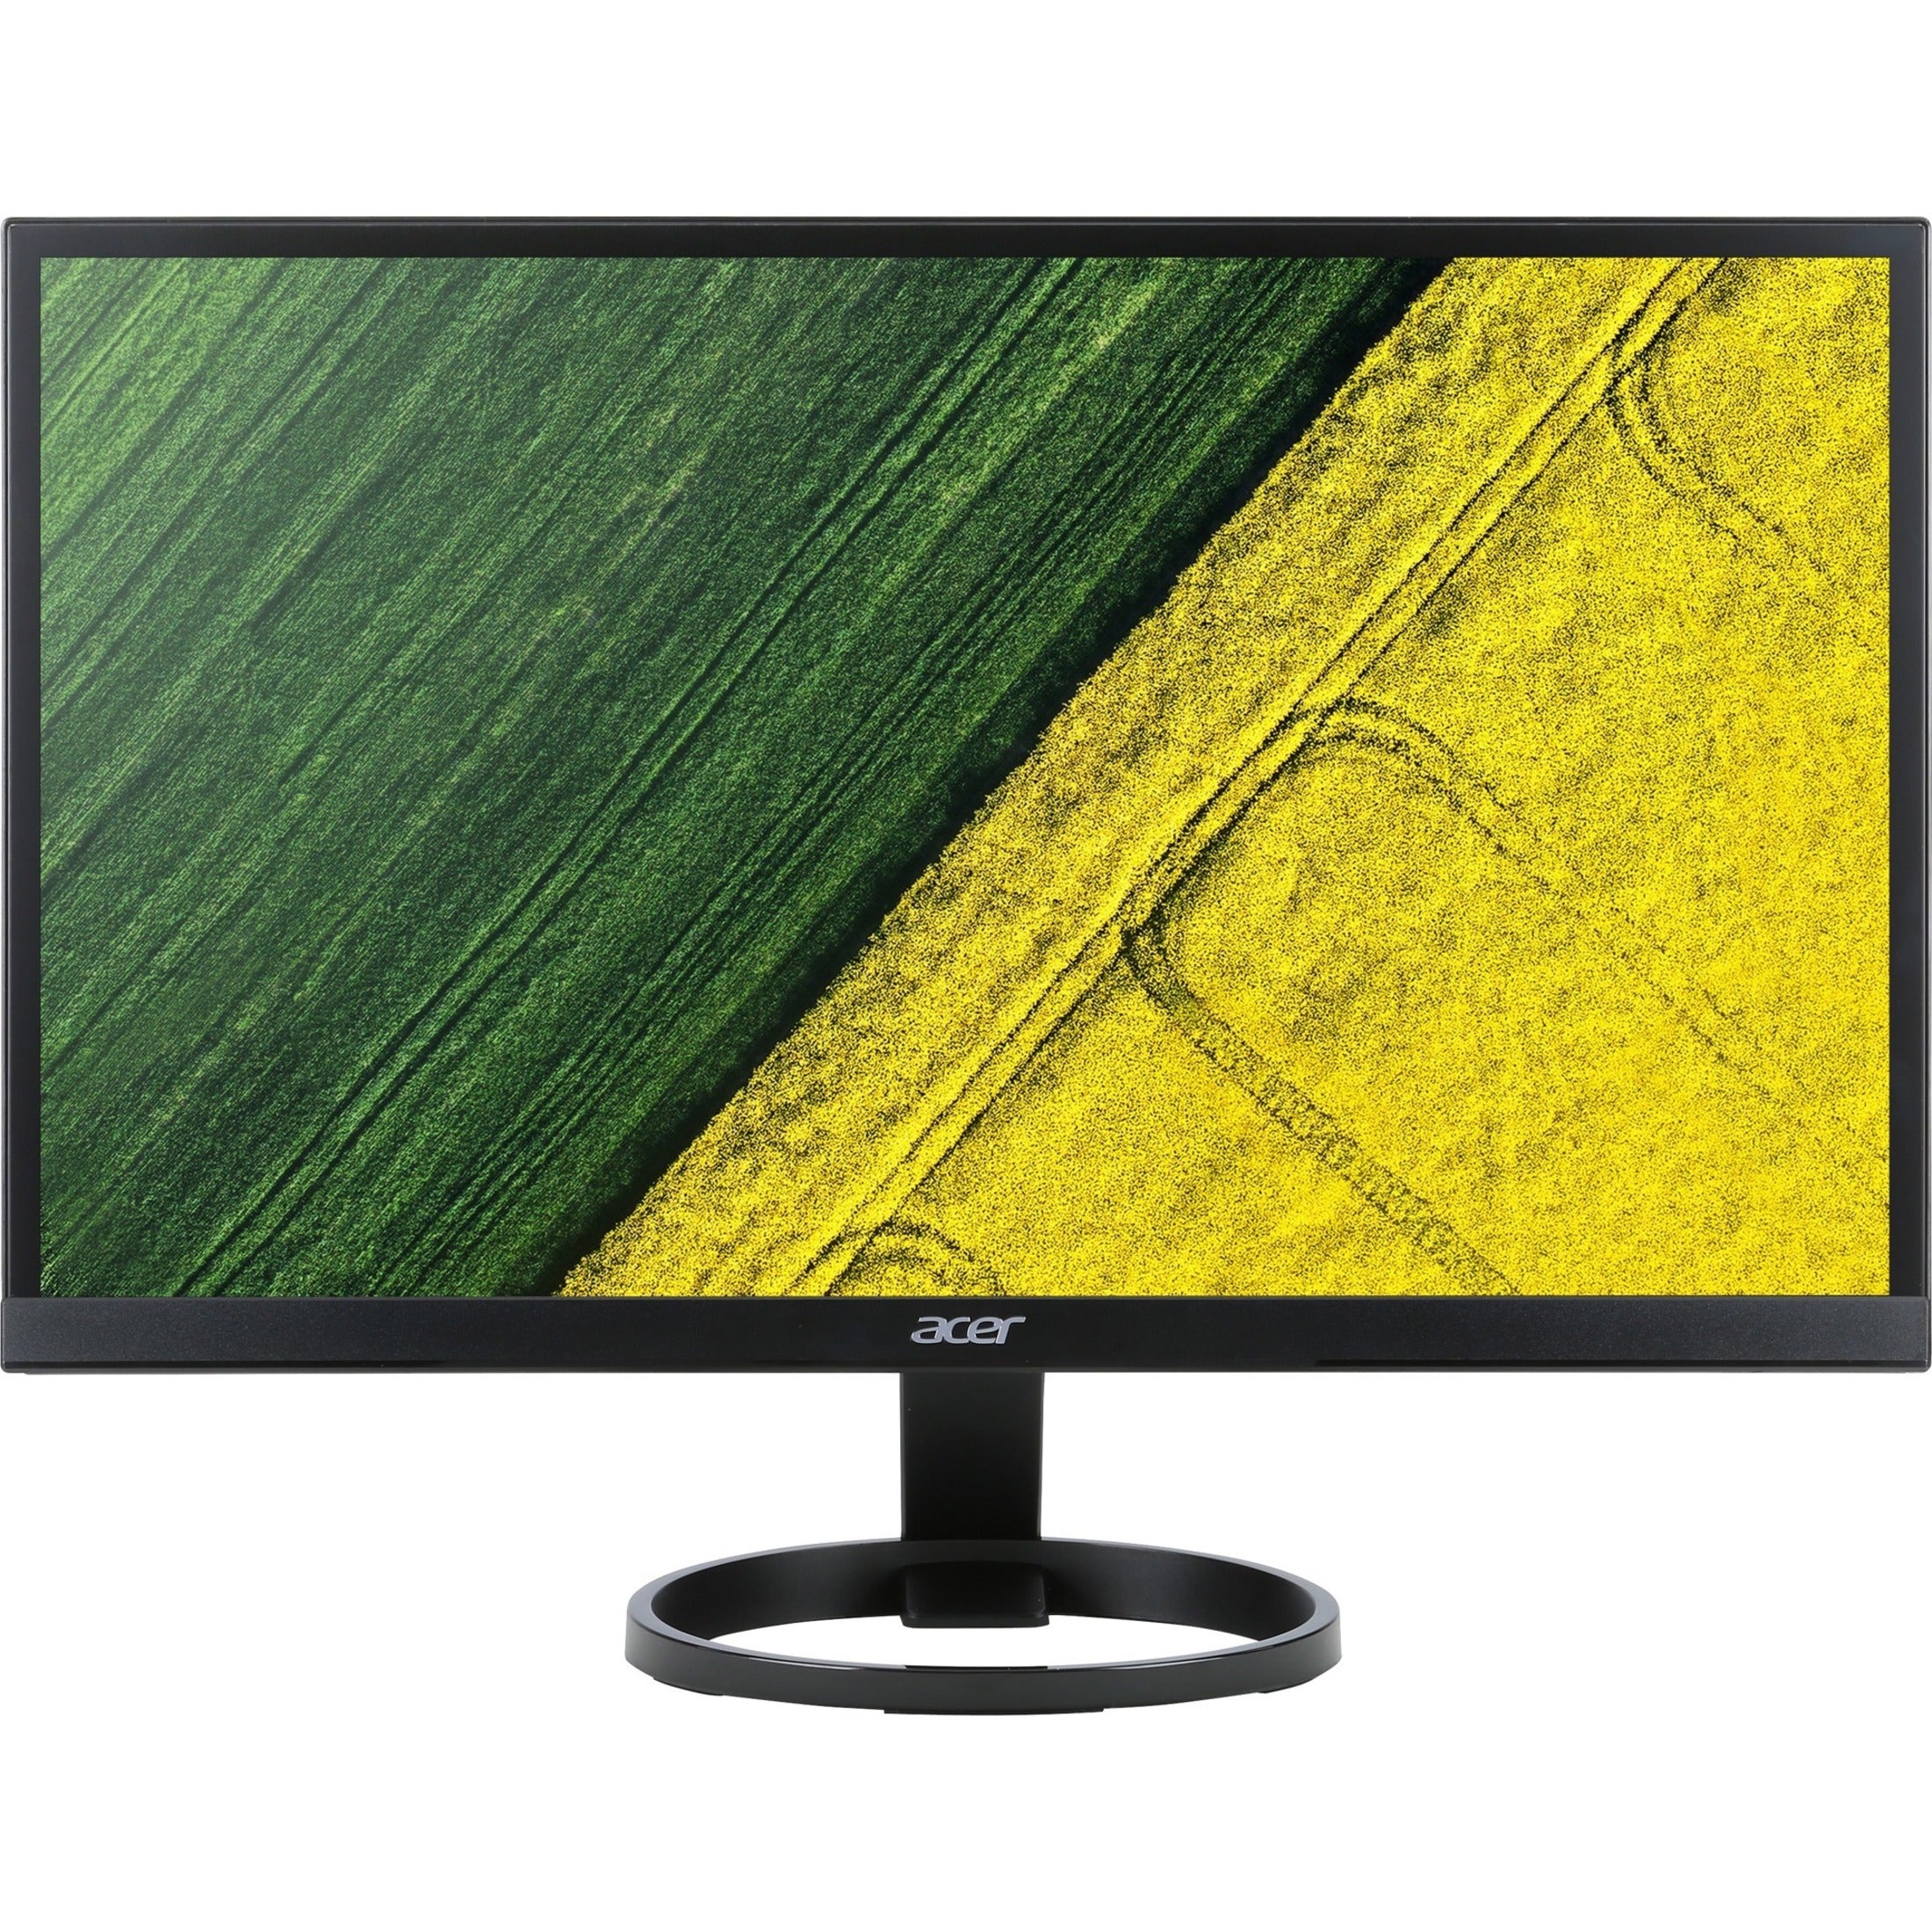 Acer R241Y 23.8 Full HD LCD Monitor - Black [Discontinued]